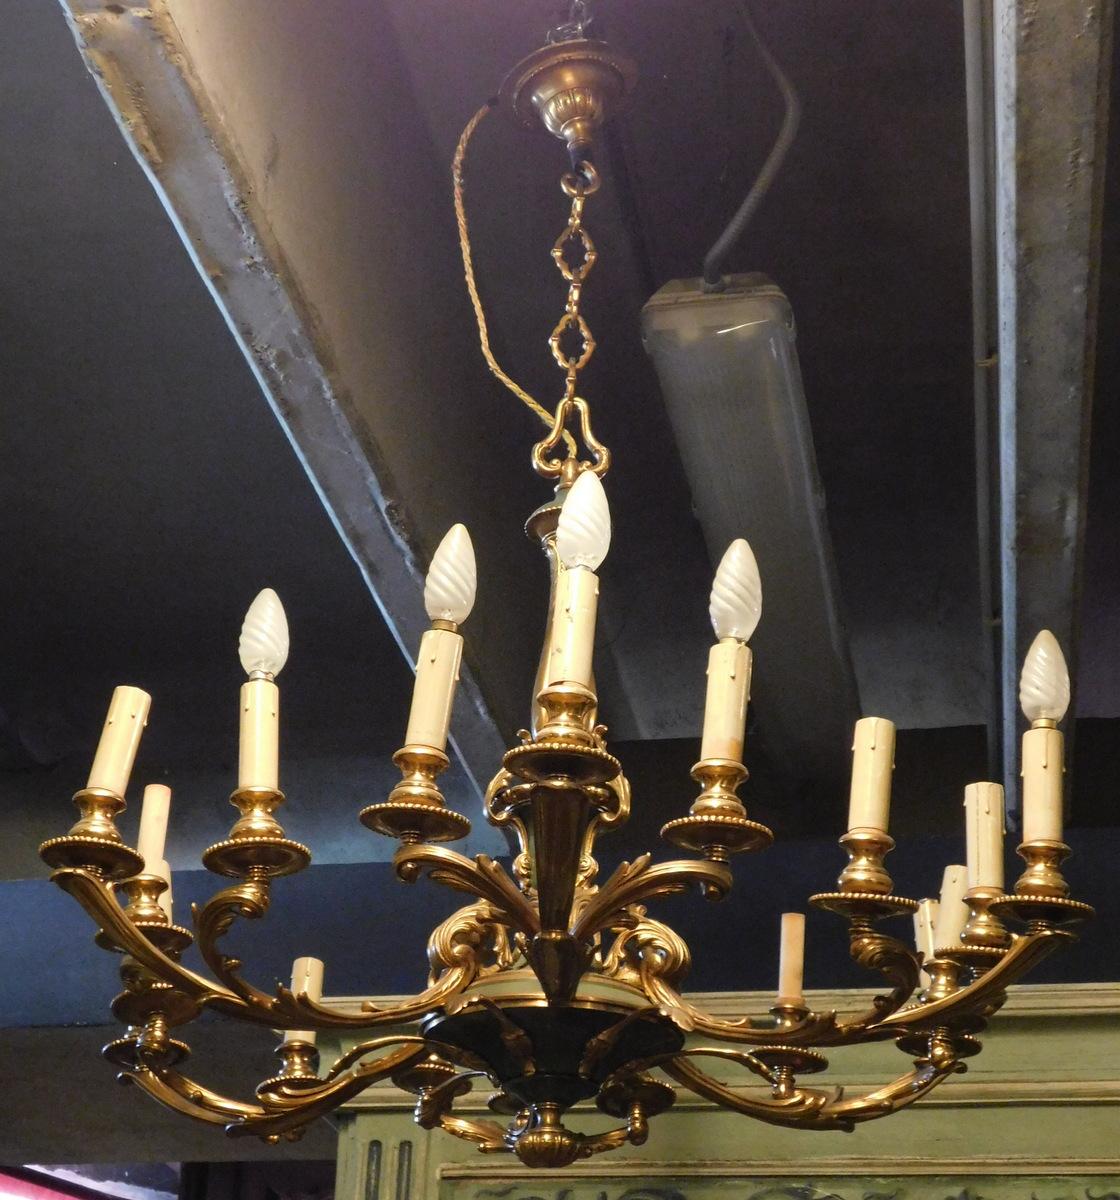 Ceiling Chandelier Lamp, 18 Lights, Gilded Brass, Italian Liberty '900 For Sale 3